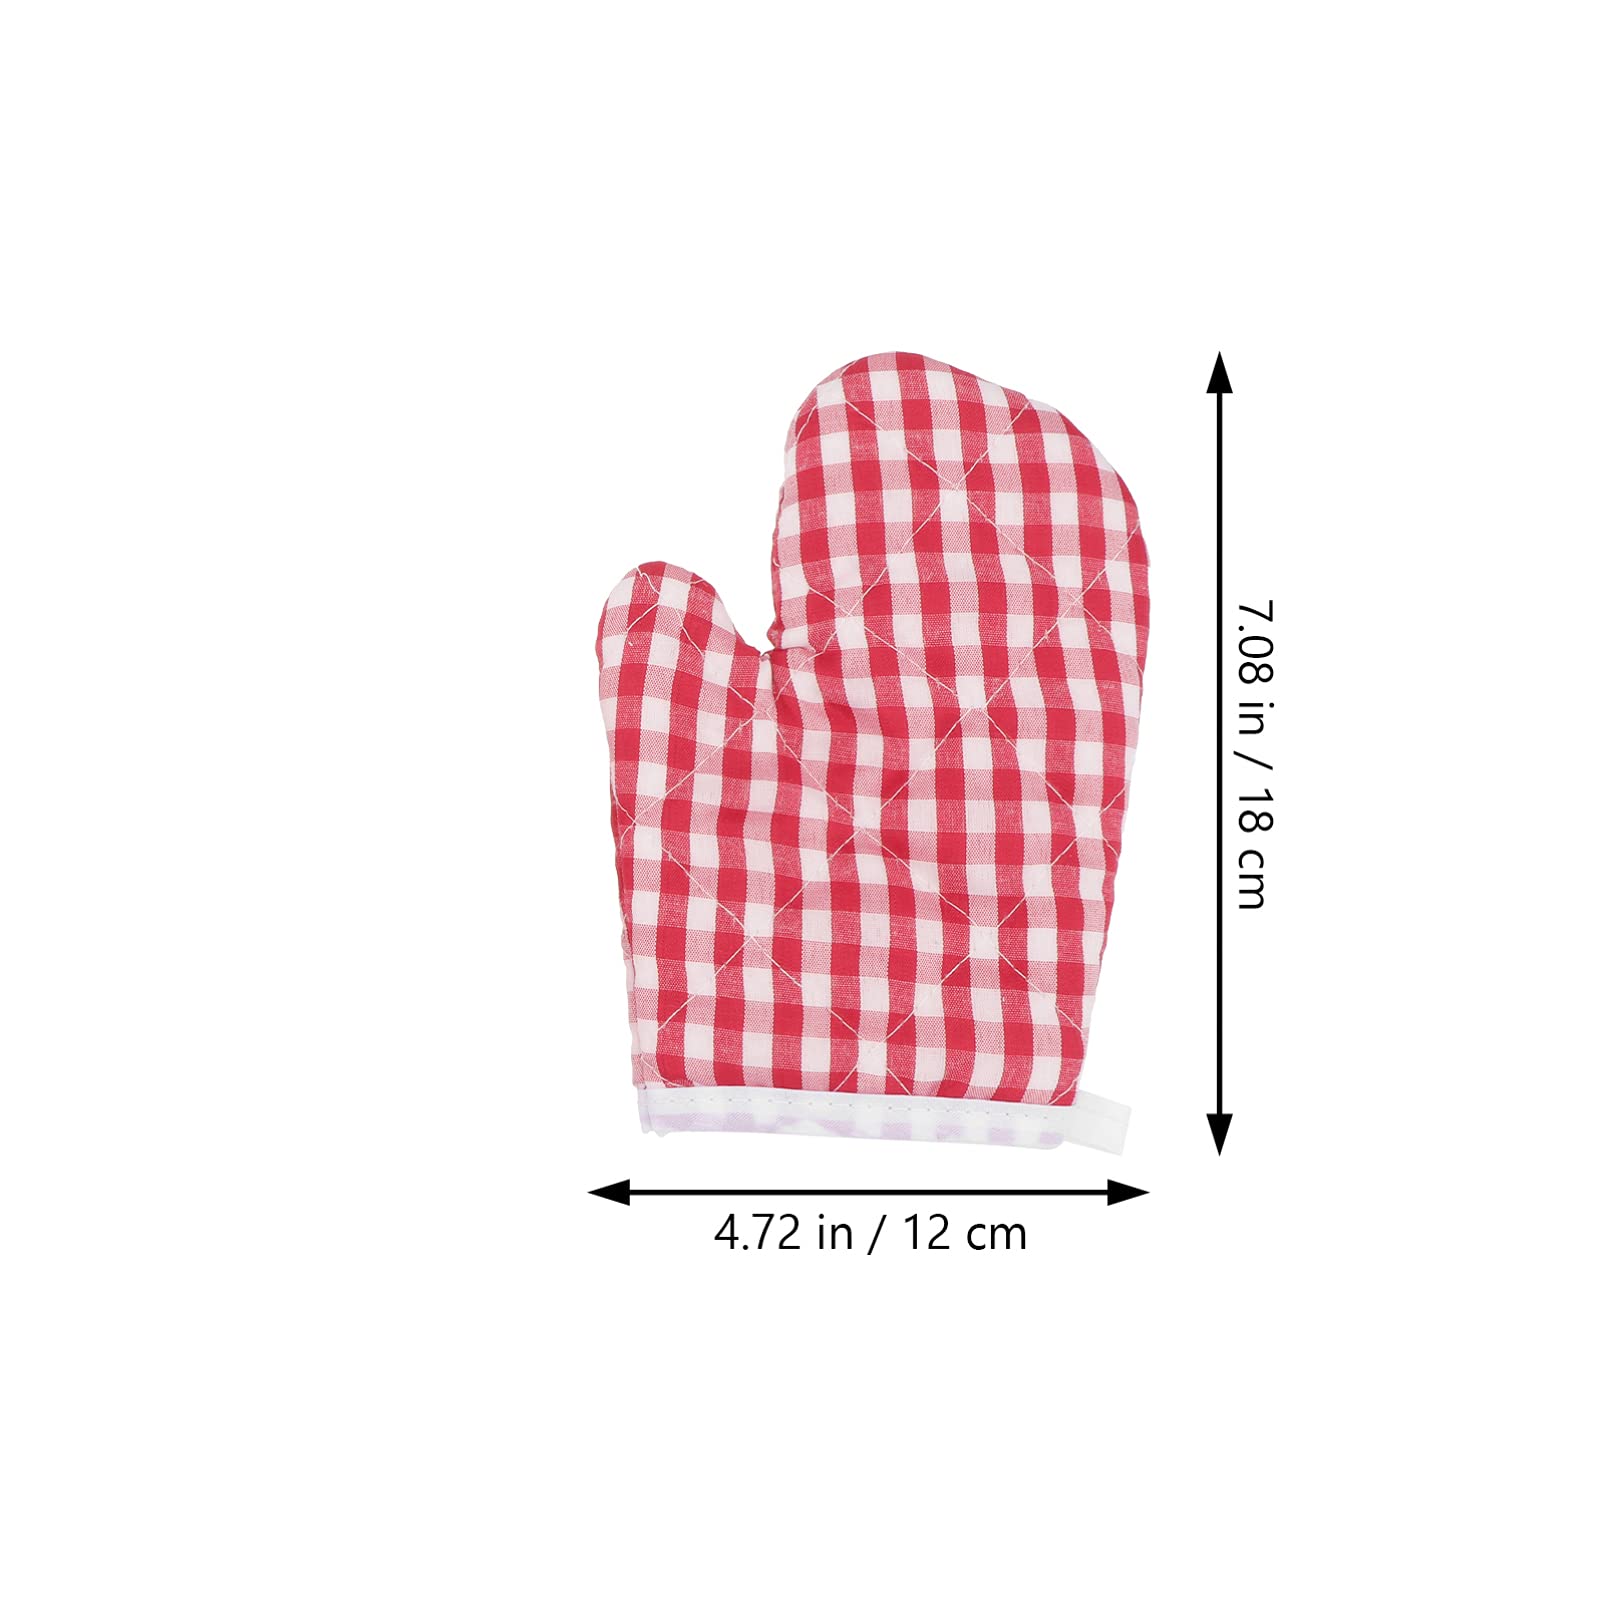 cabilock Oven Mitts Glove Heat Insulation Mitts Red Grid Kitchen Microwave Oven Gloves Mitts Anti-Scald Baking Gloves for Children Adult Cooking Gloves, 1 Pair, 7x4.7 inch (Red)